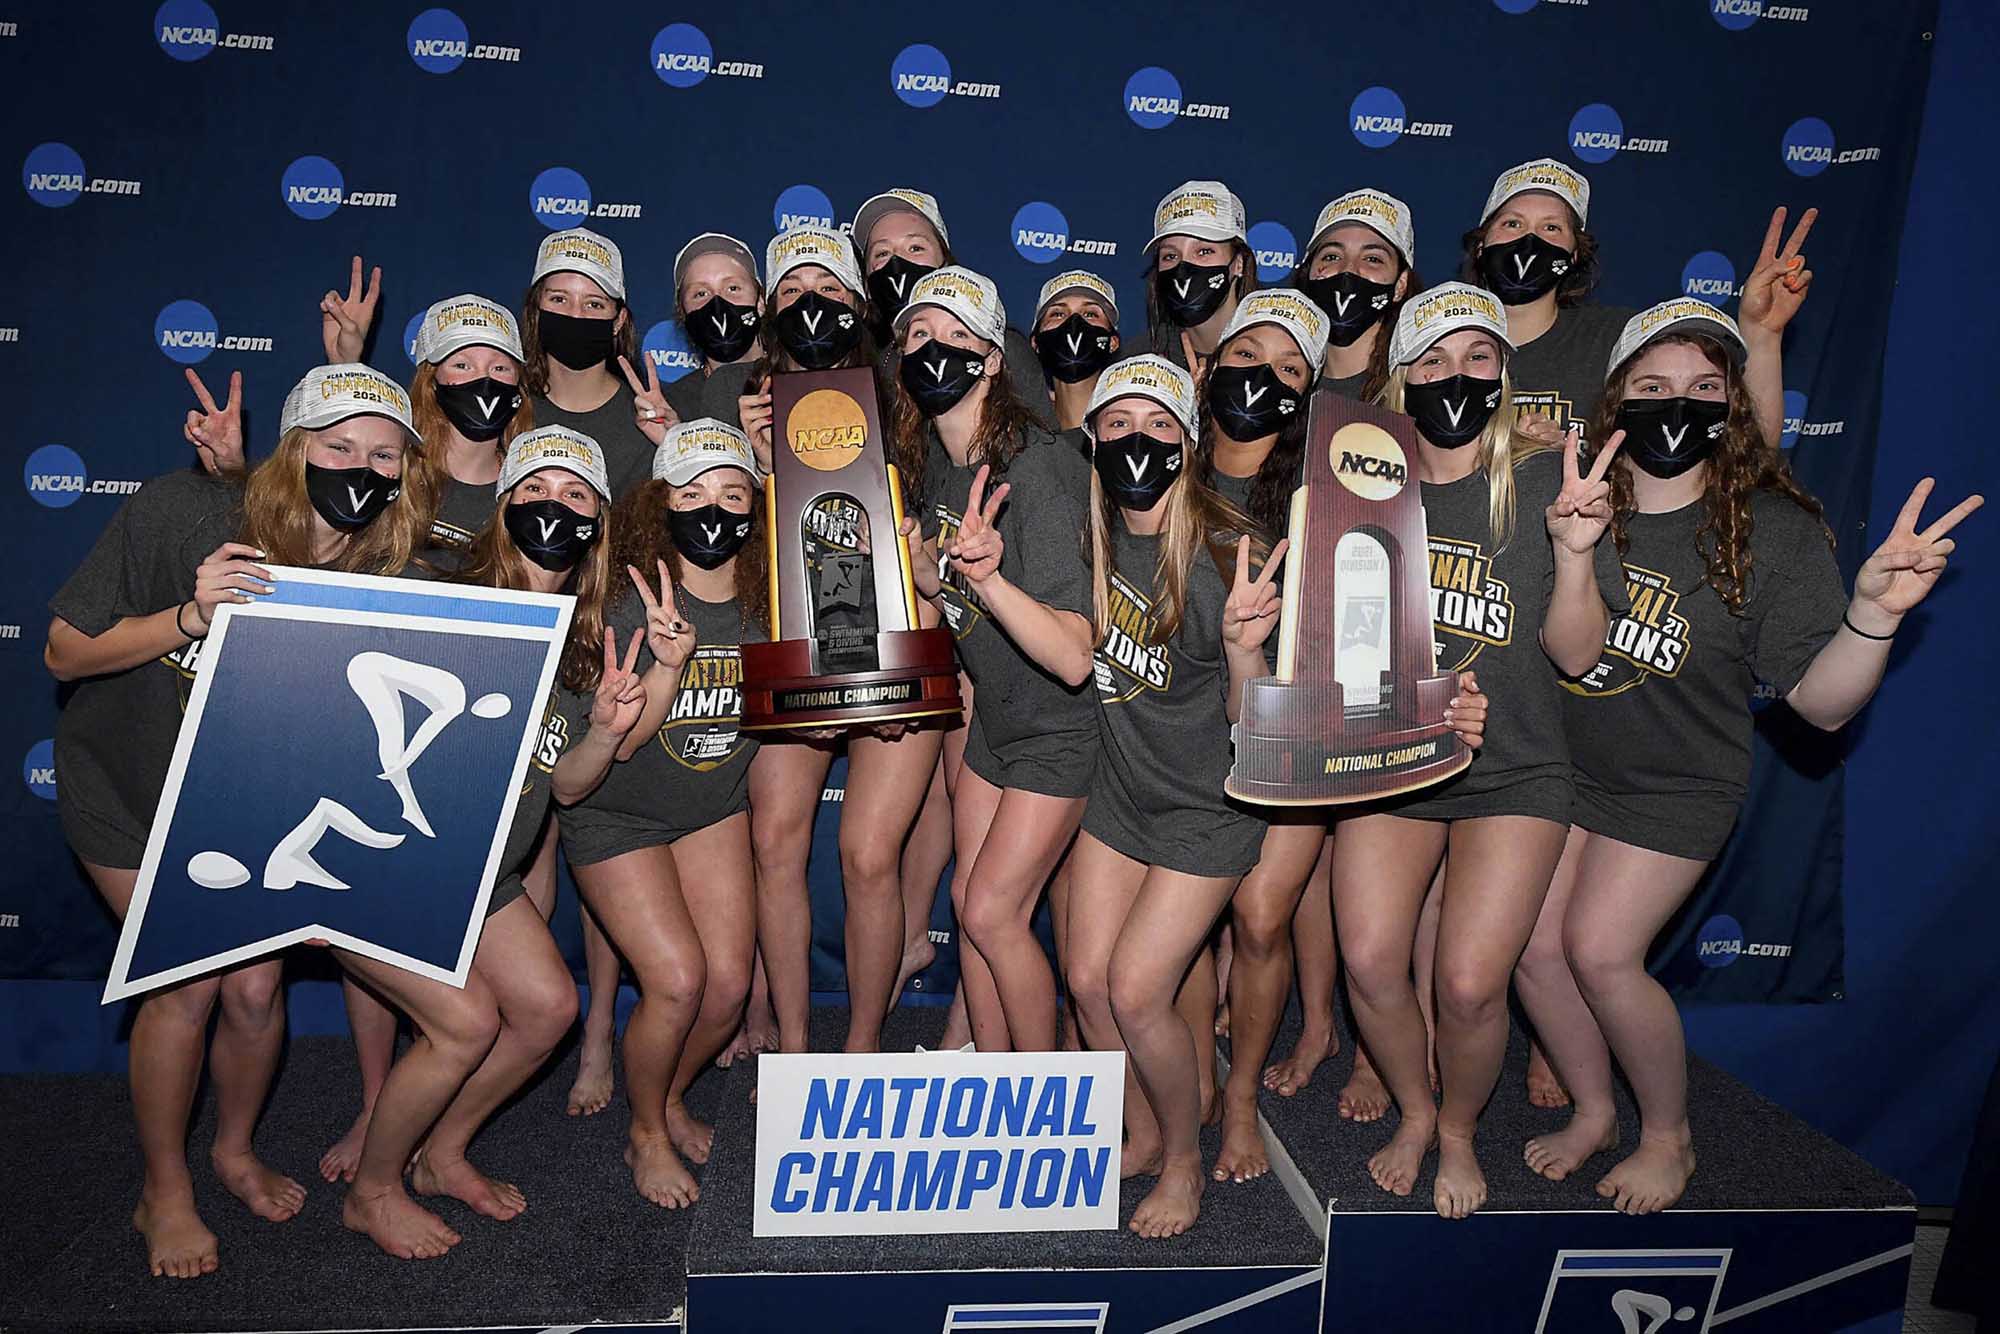 The UVA women’s swimming and diving team pose together with their trophy